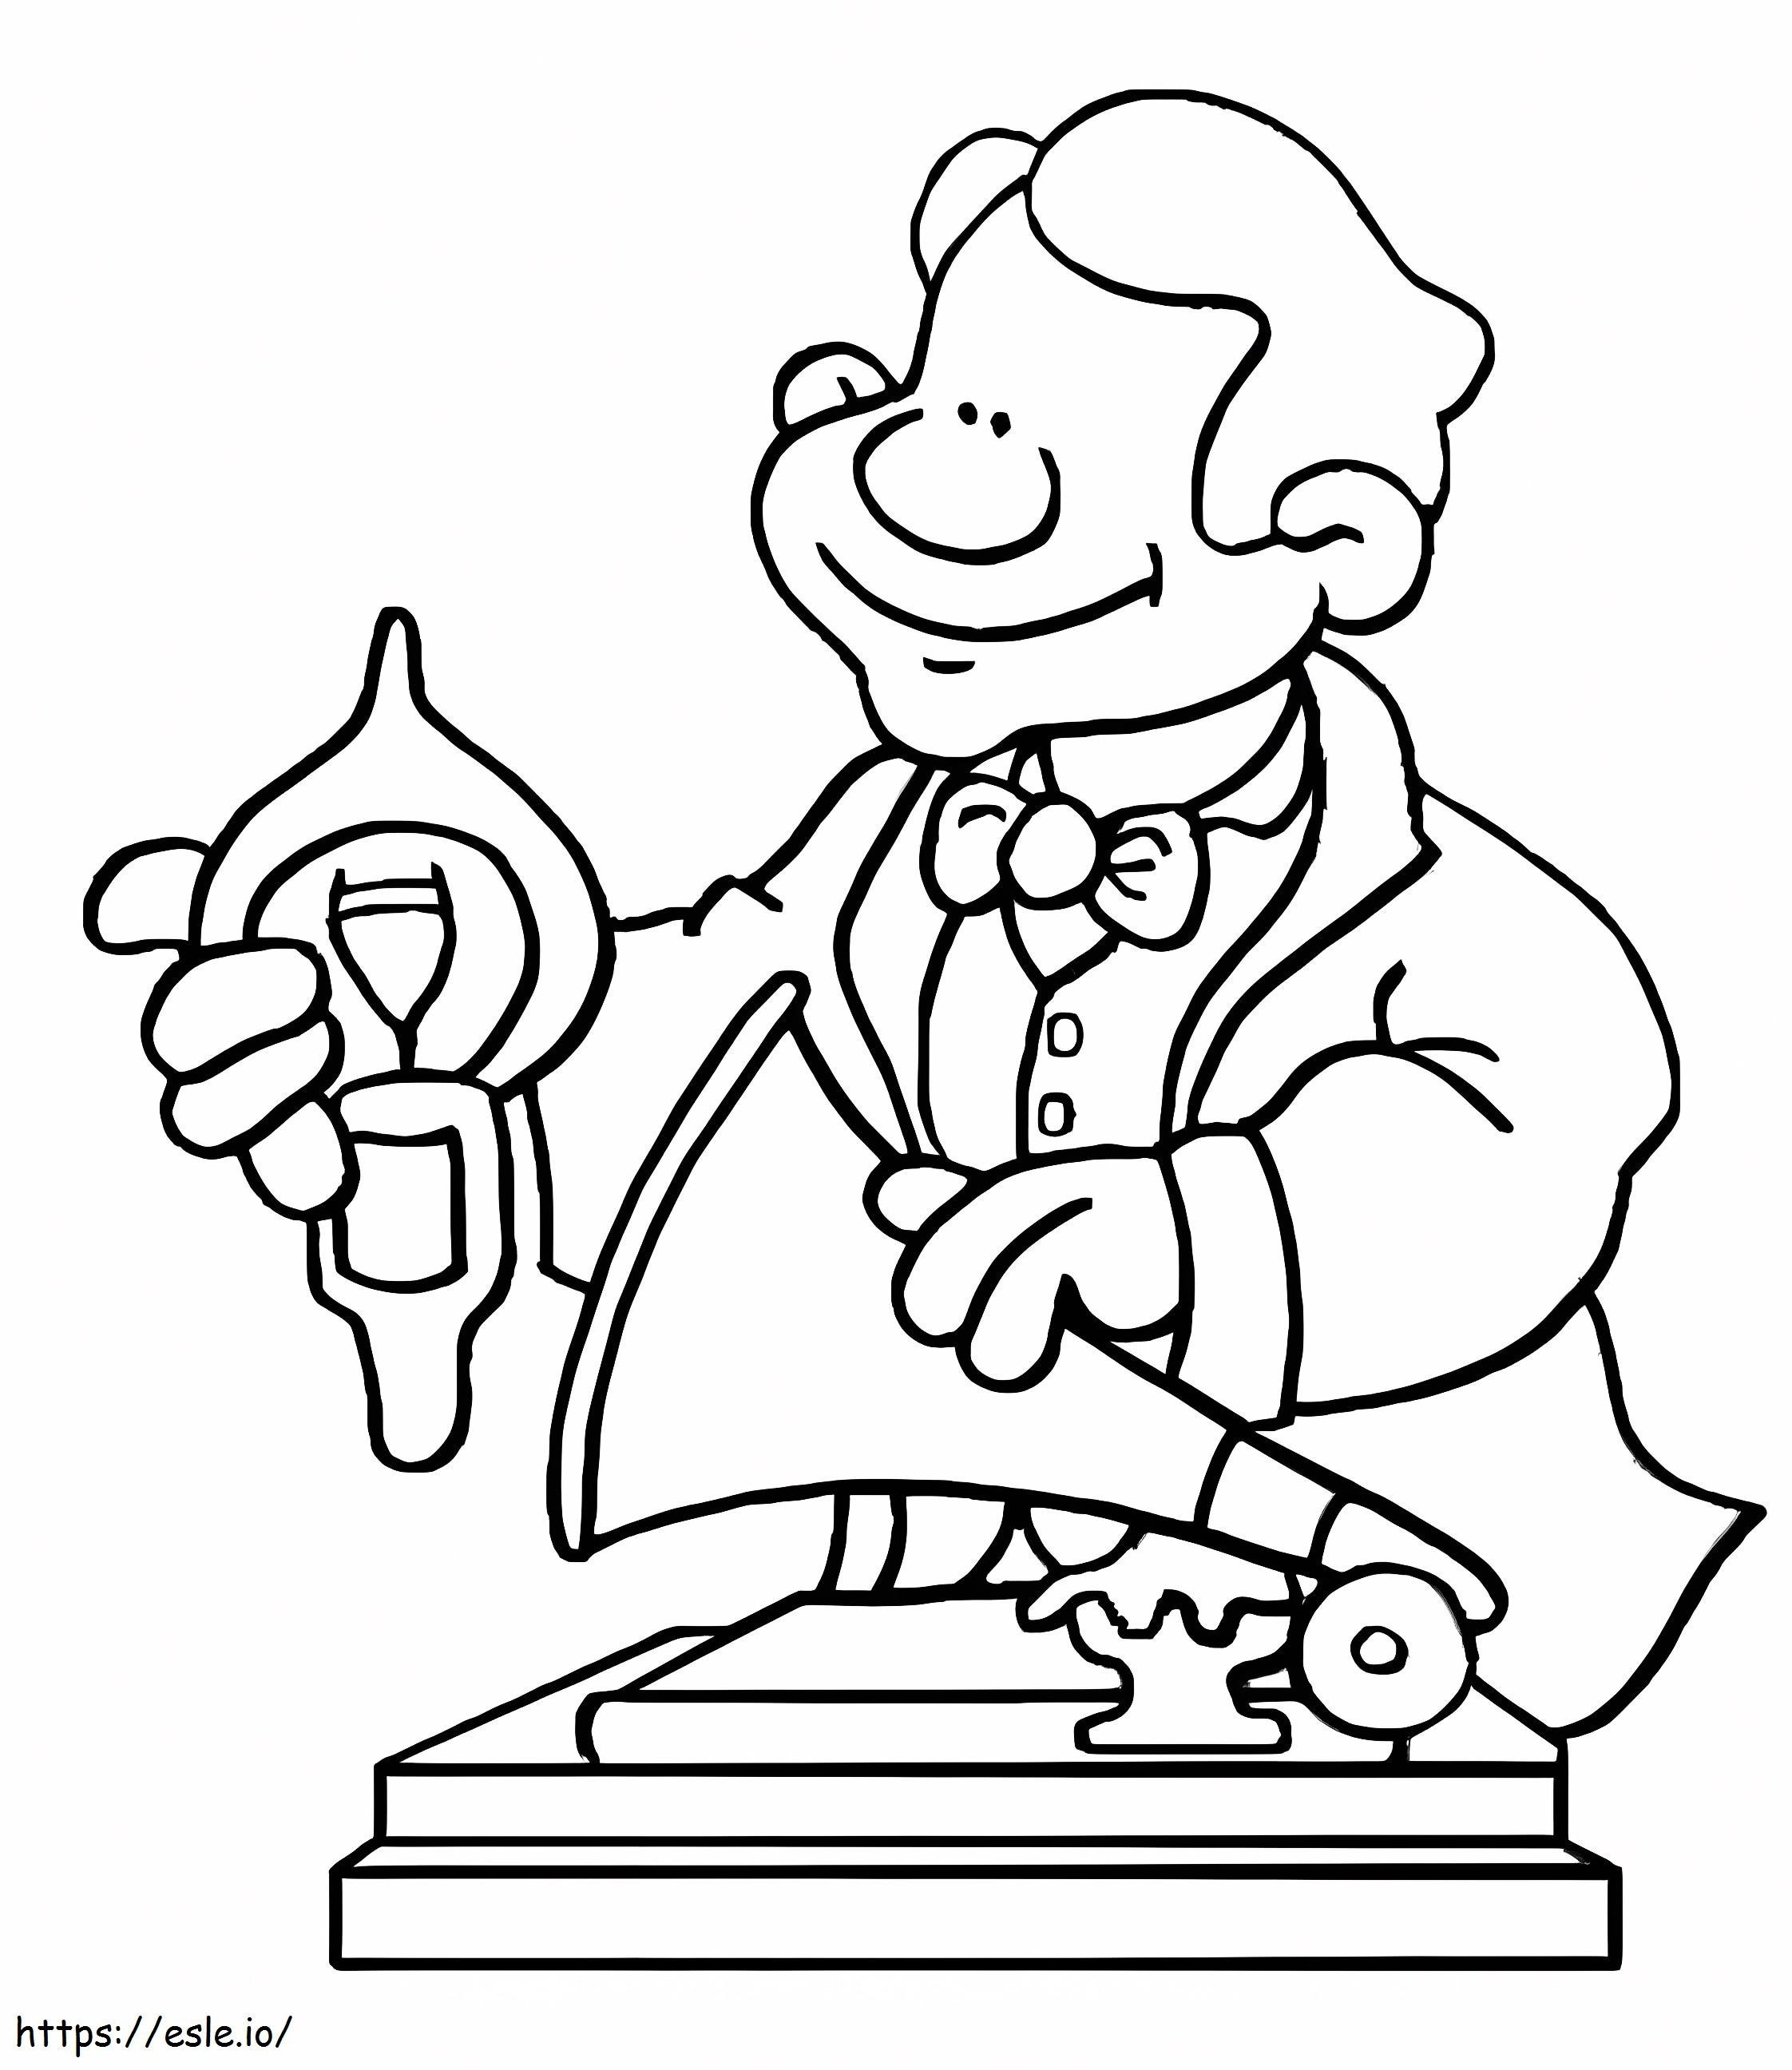 Thomas Edison To Color coloring page